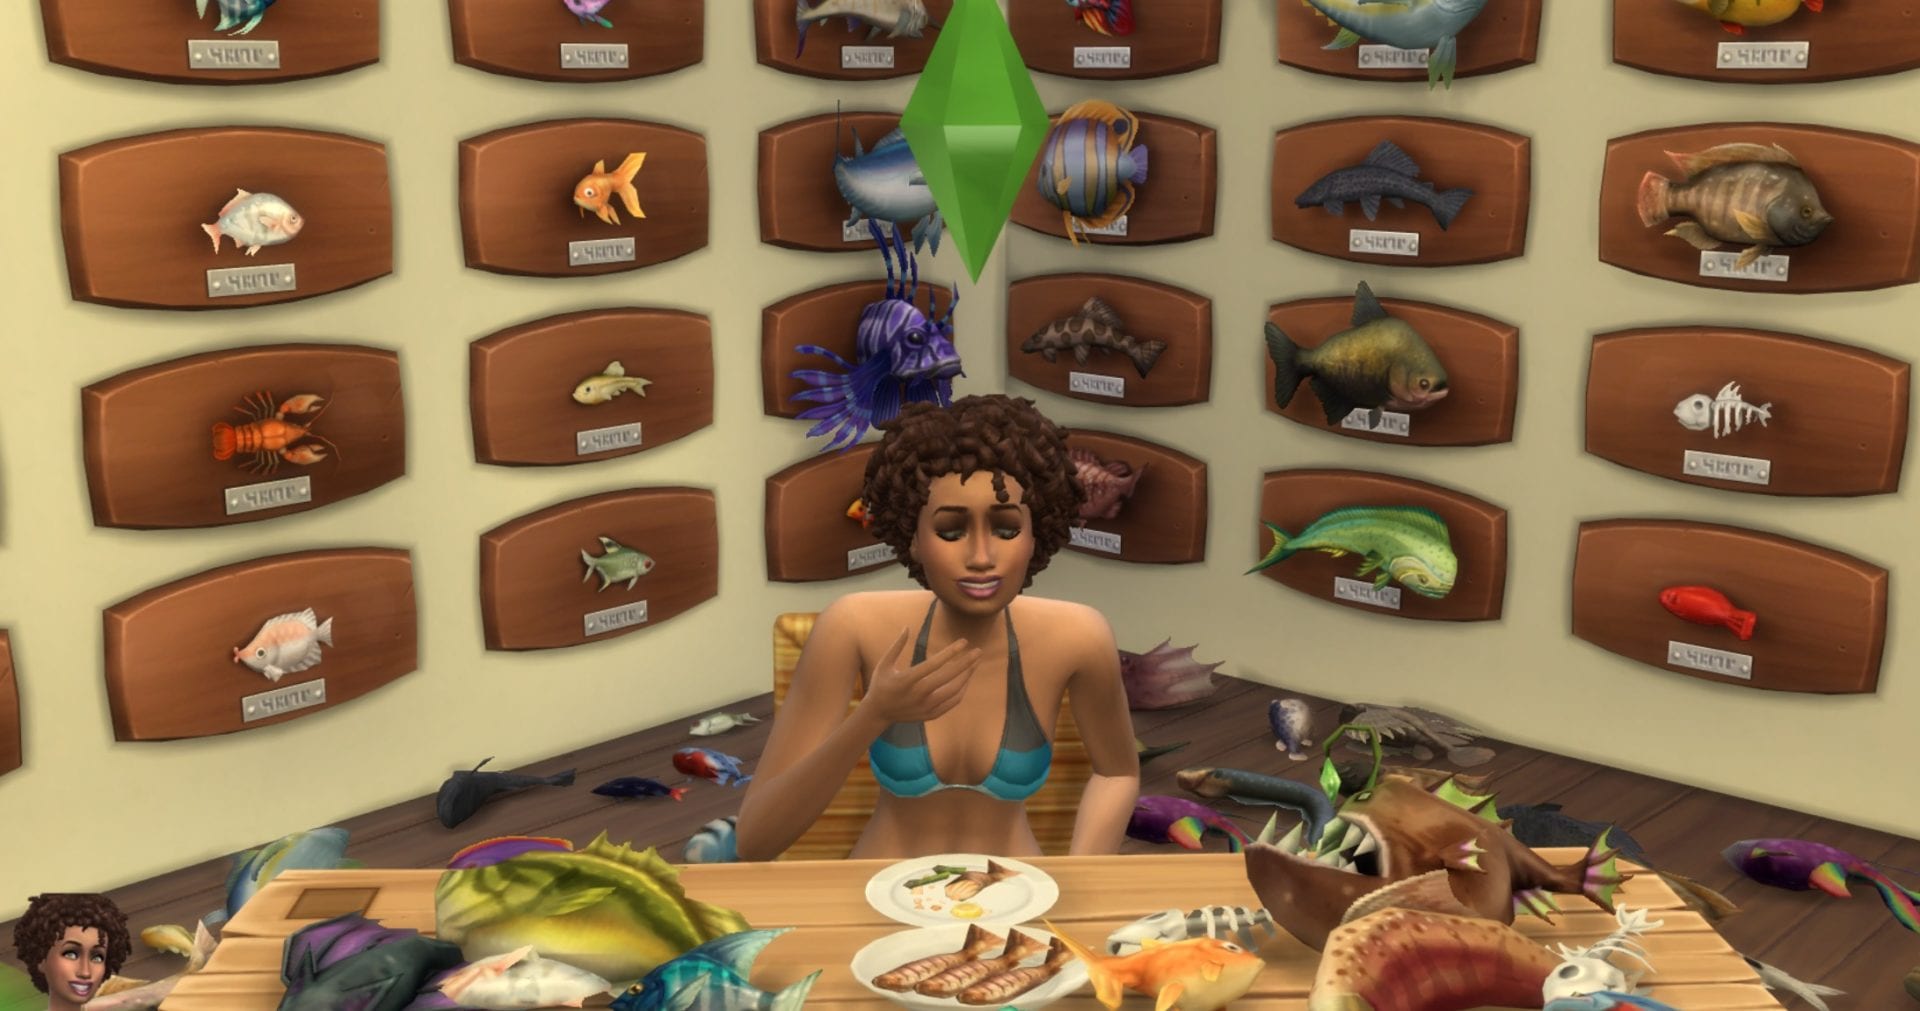 sims 4 best mods to have